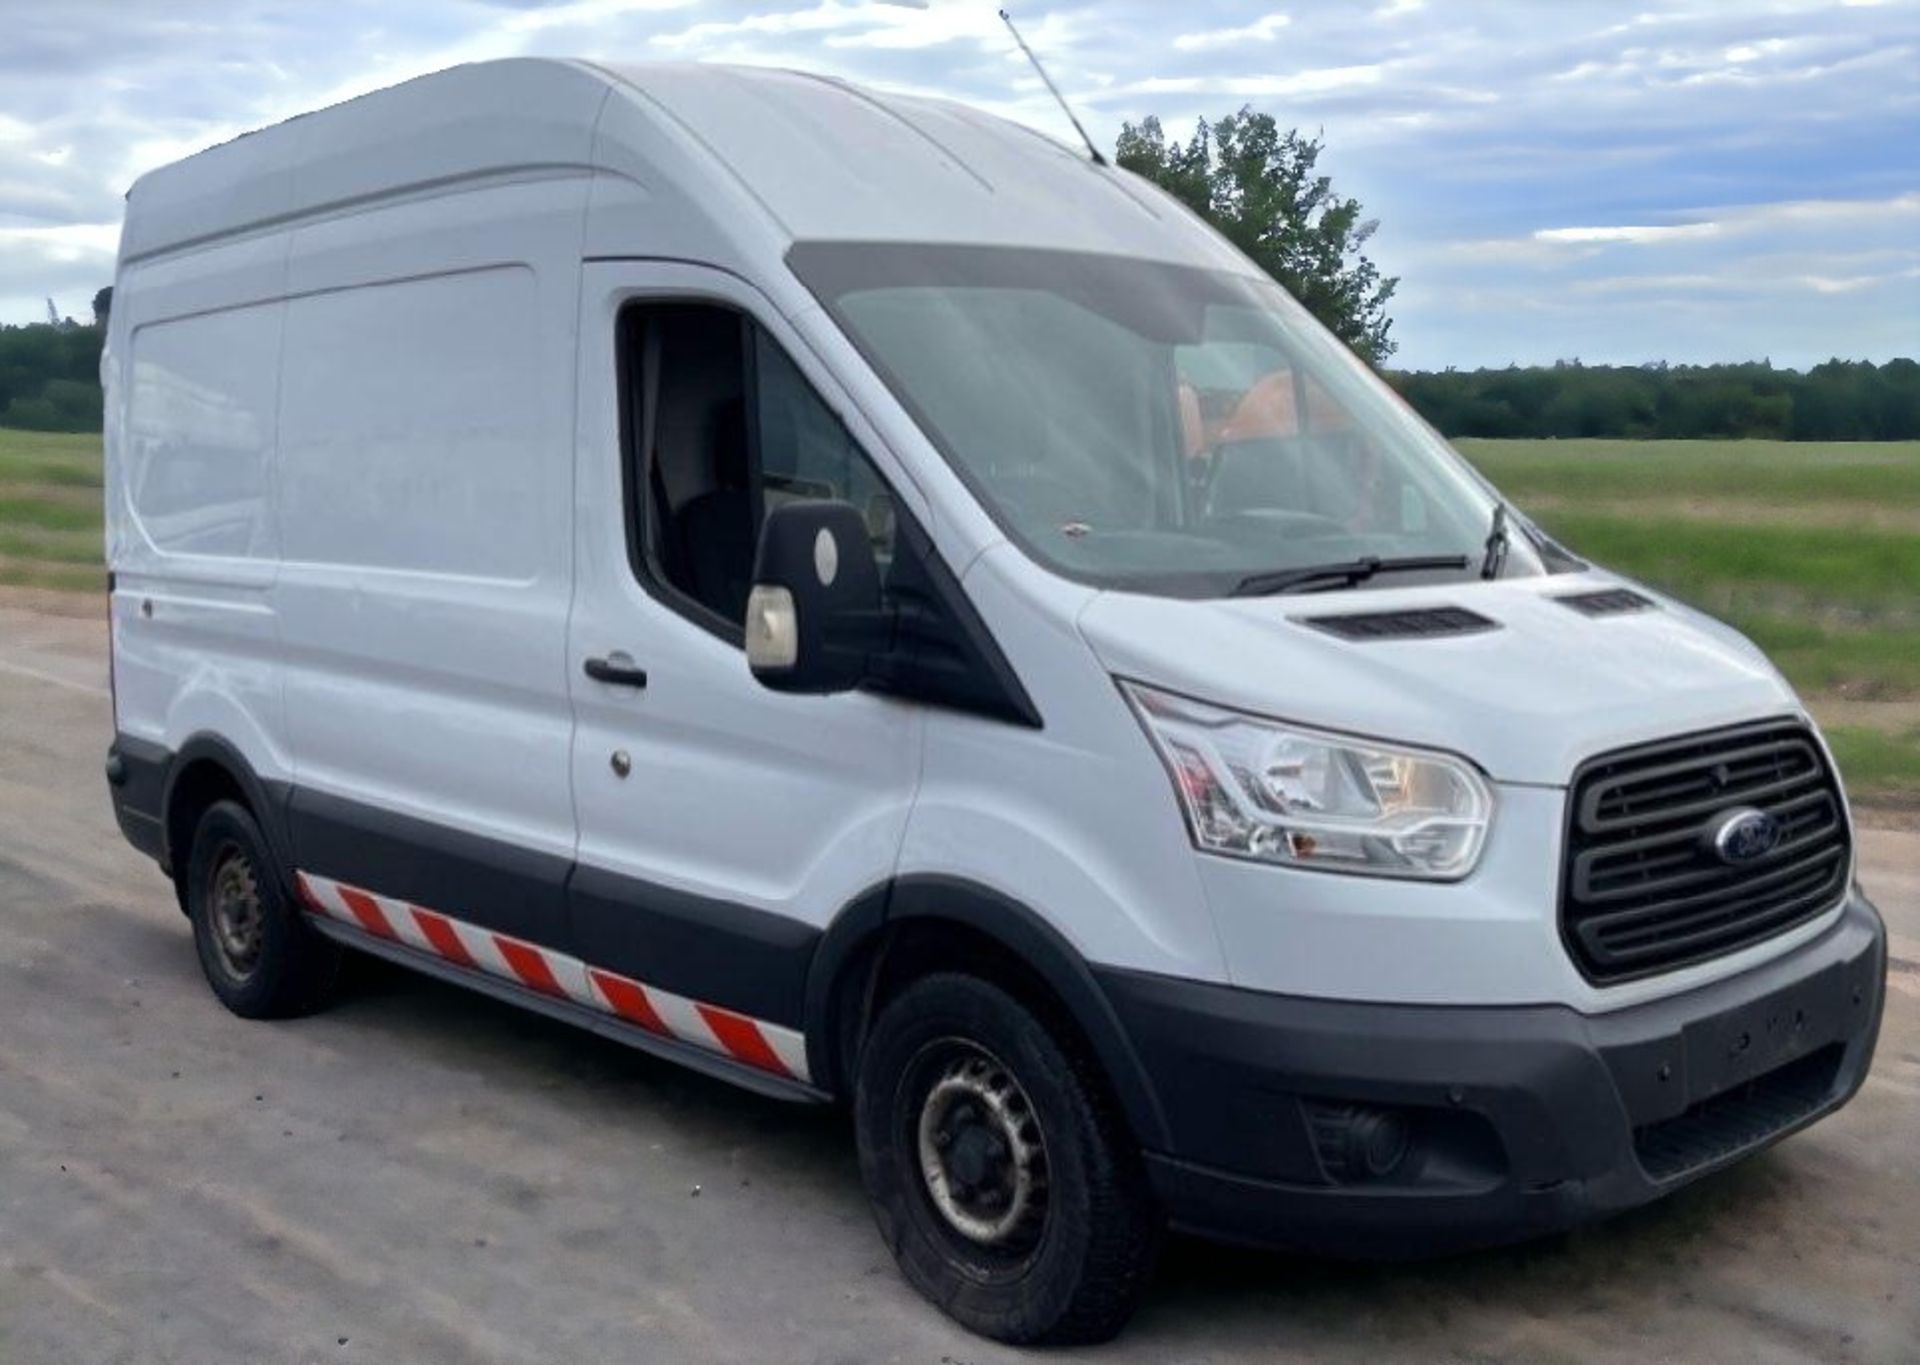 2015 FORD TRANSIT T350 MEDIUM WHEEL BASE - YOUR RELIABLE WORKHORSE